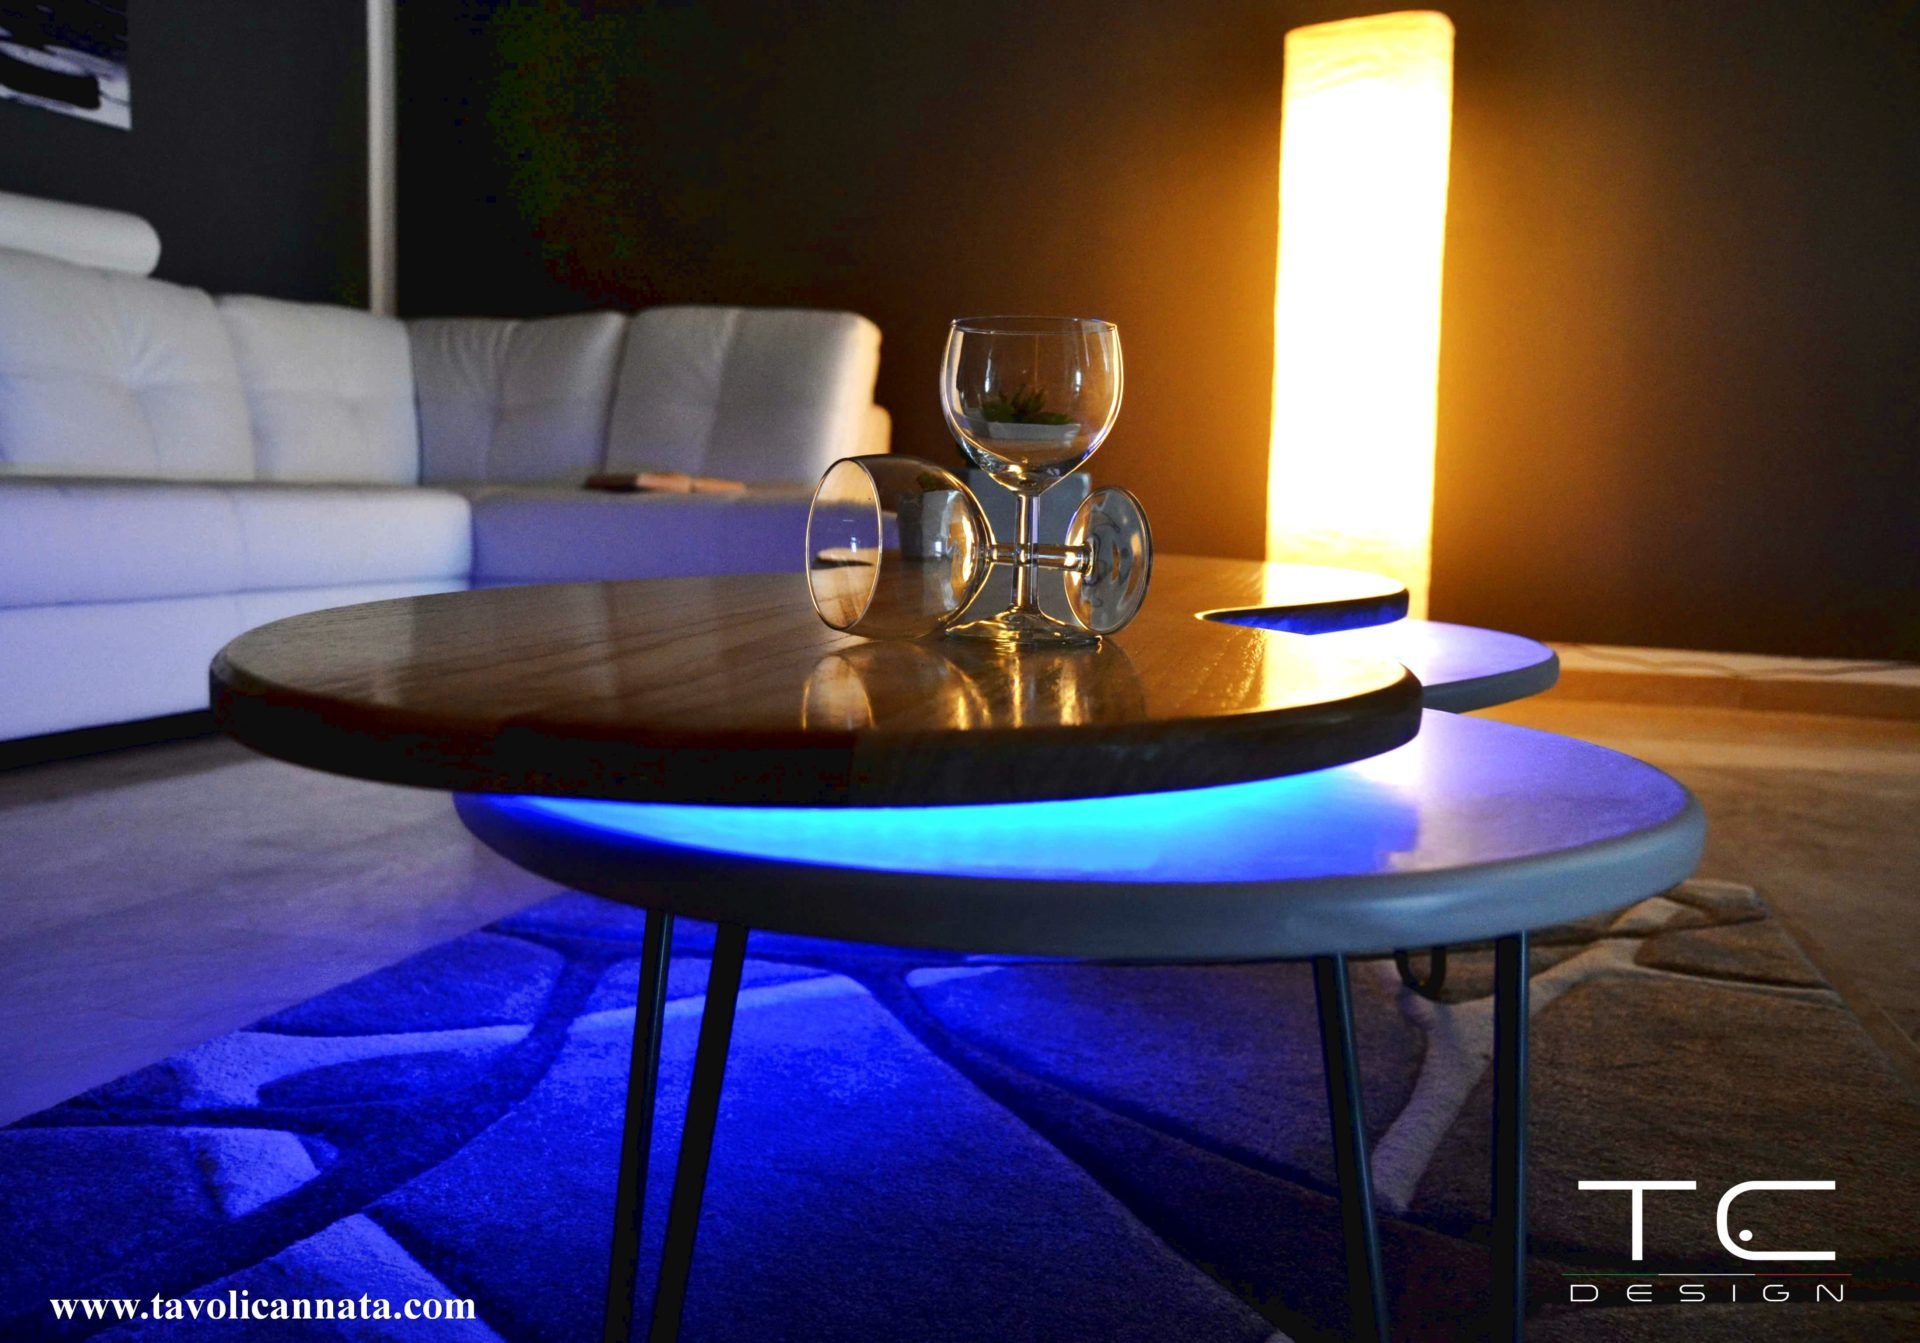 Coffee Table With Led Light Unique Design Made In Italy – Tavolini Cannata Throughout Coffee Tables With Led Lights (View 8 of 15)